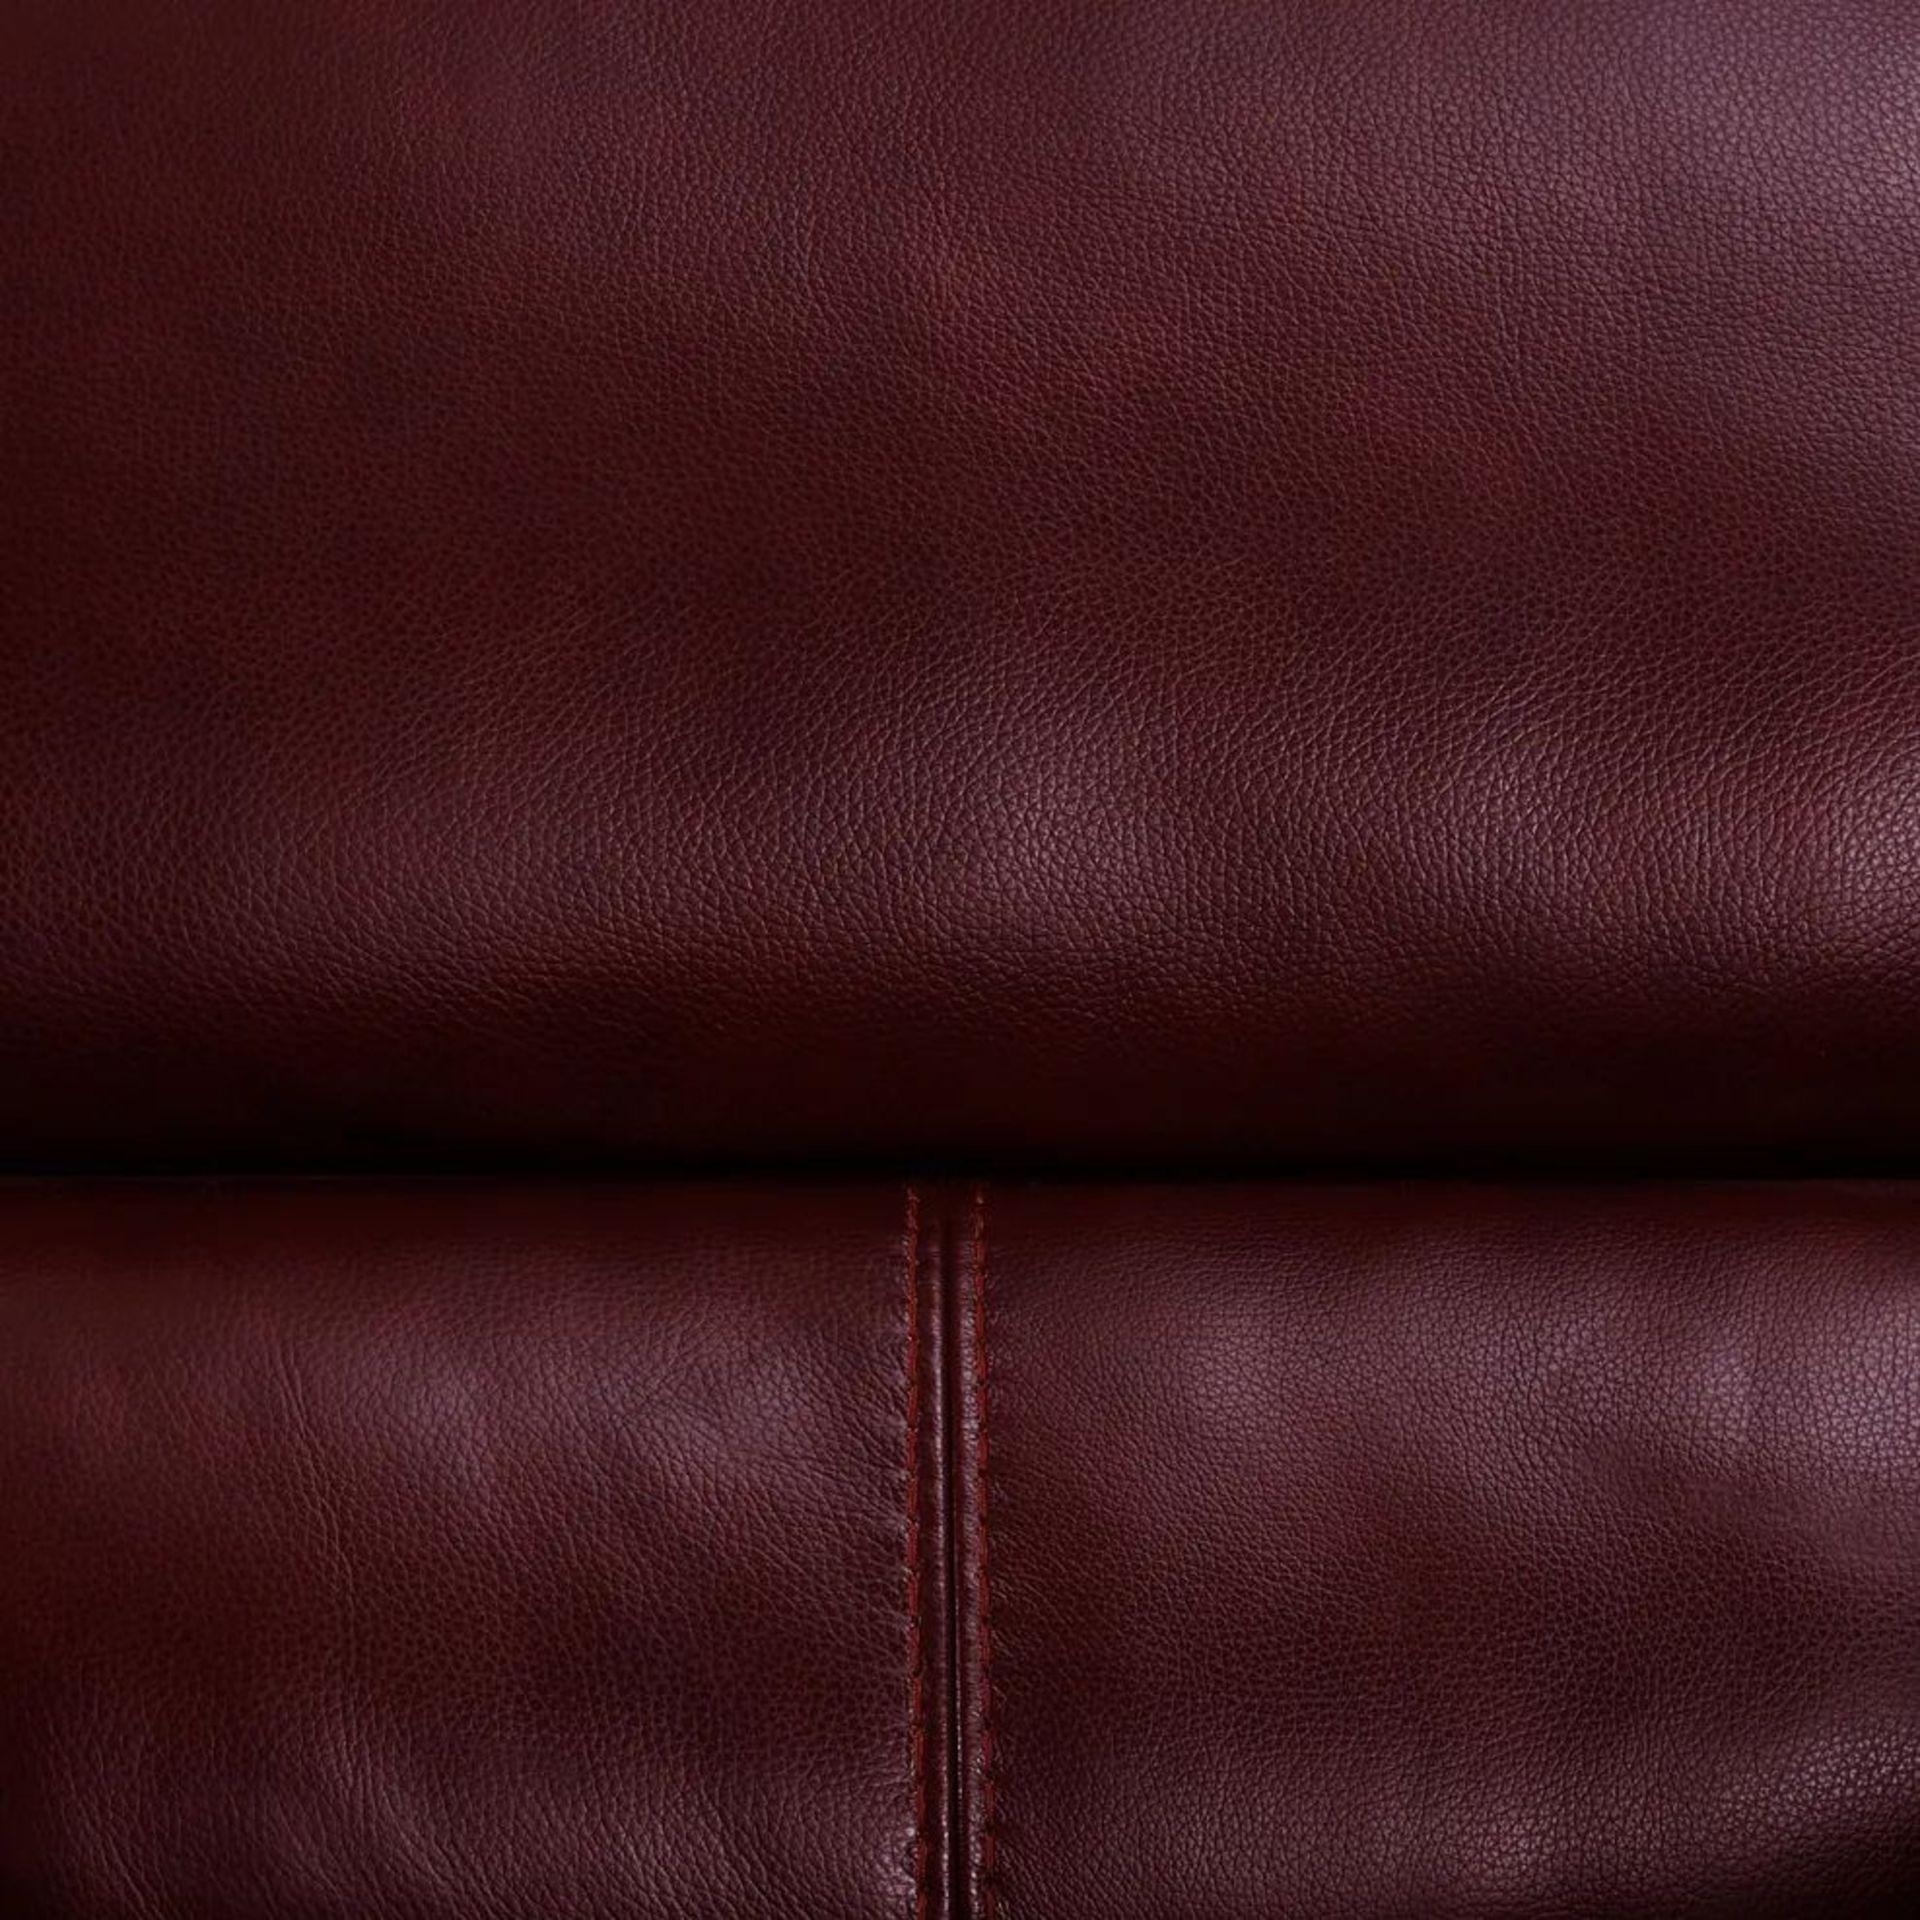 BRAND NEW ARLINGTON Electric Recliner Armchair - BURGANDY LEATHER. RRP £1199. Create a traditional - Image 9 of 12